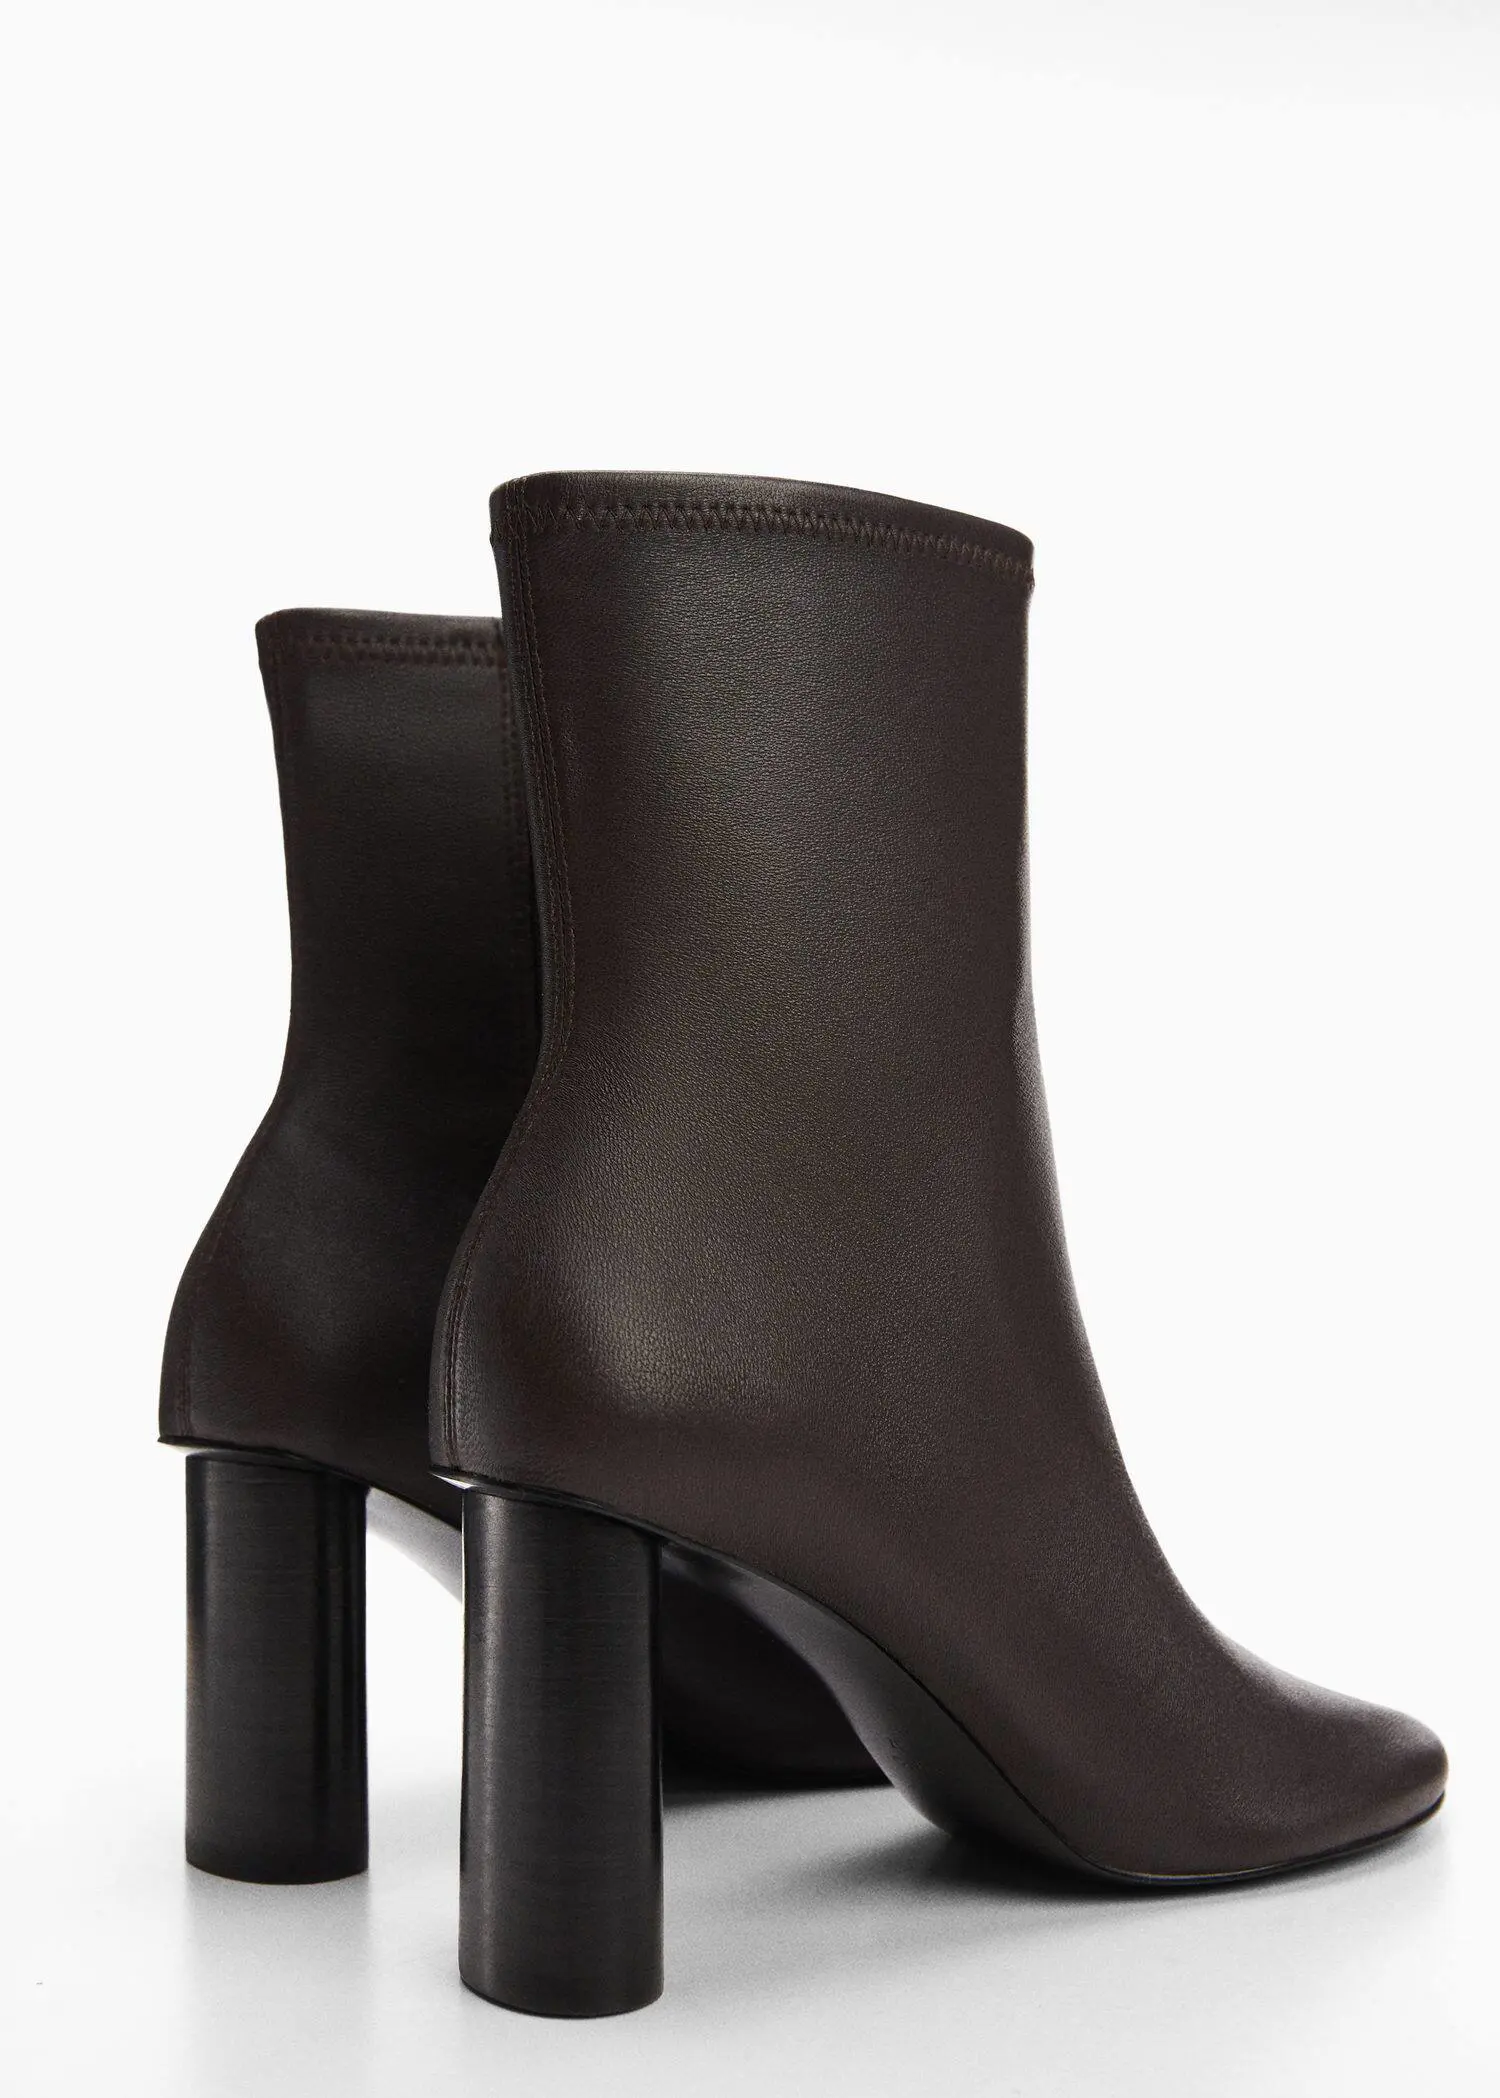 Mango Rounded toe leather ankle boots. 3